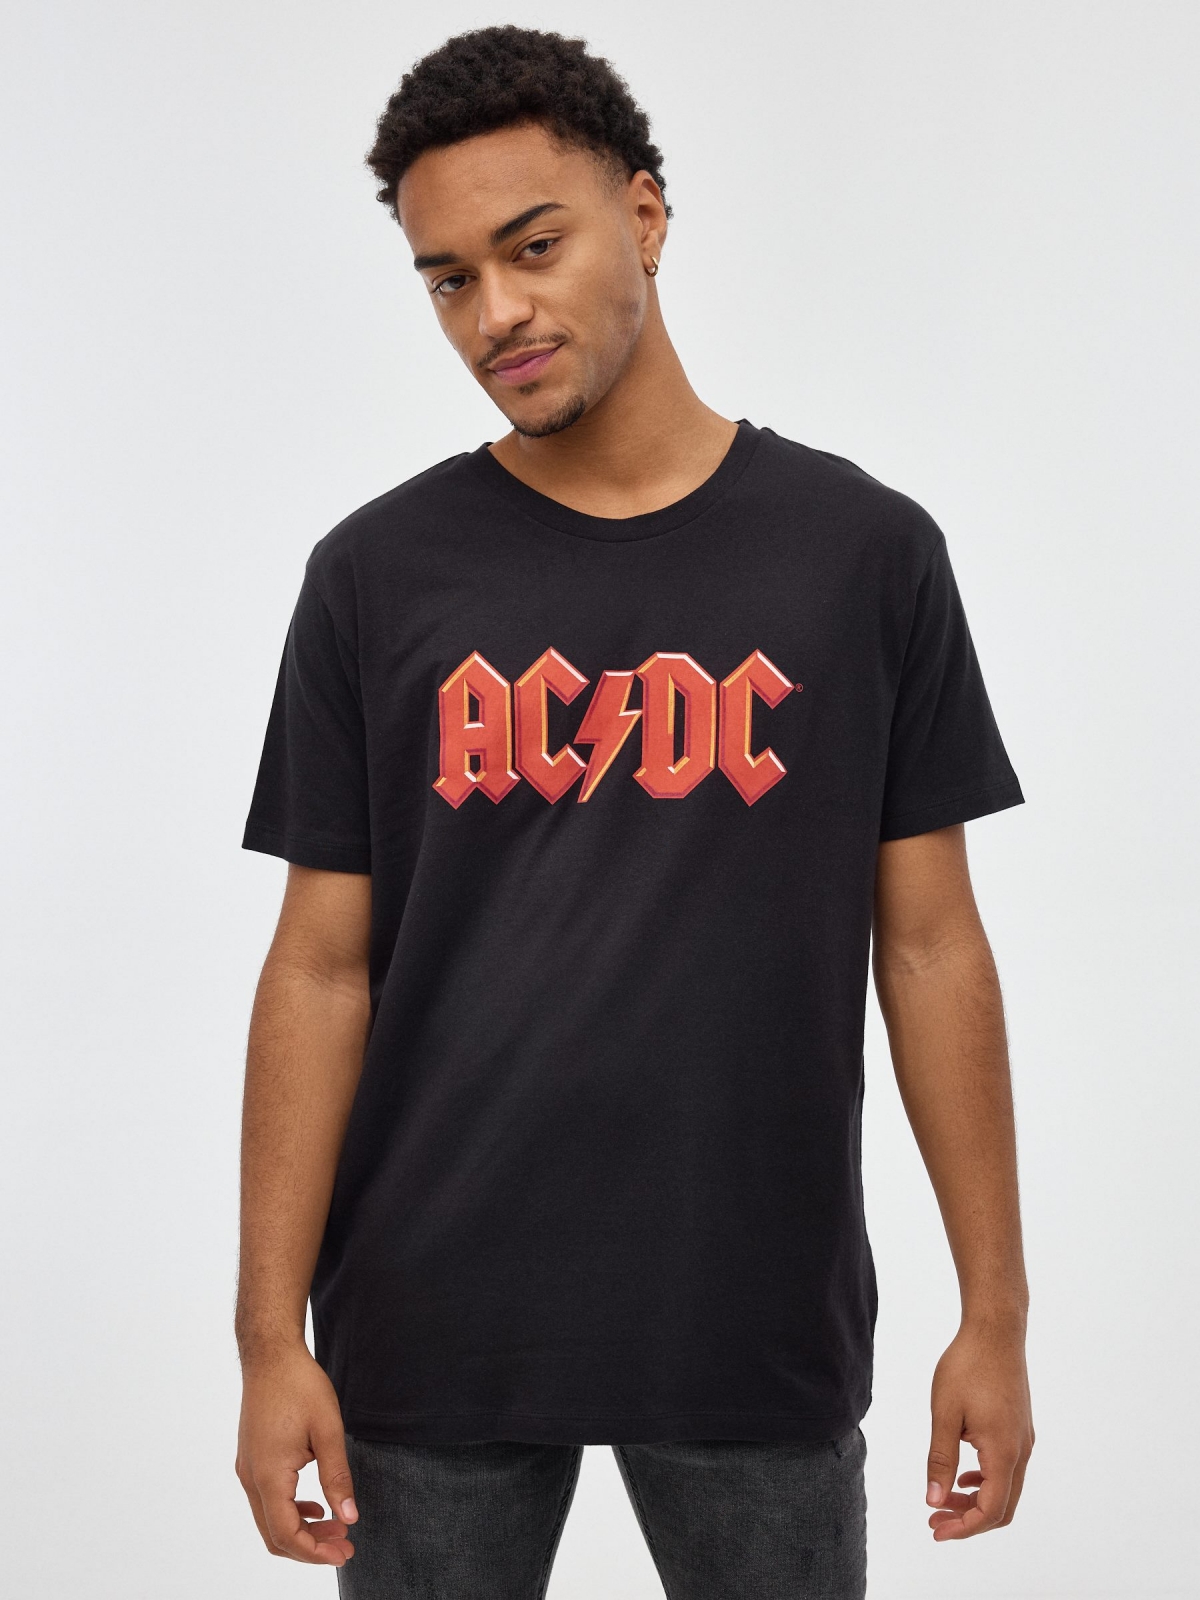 ACDC black T-shirt black middle front view